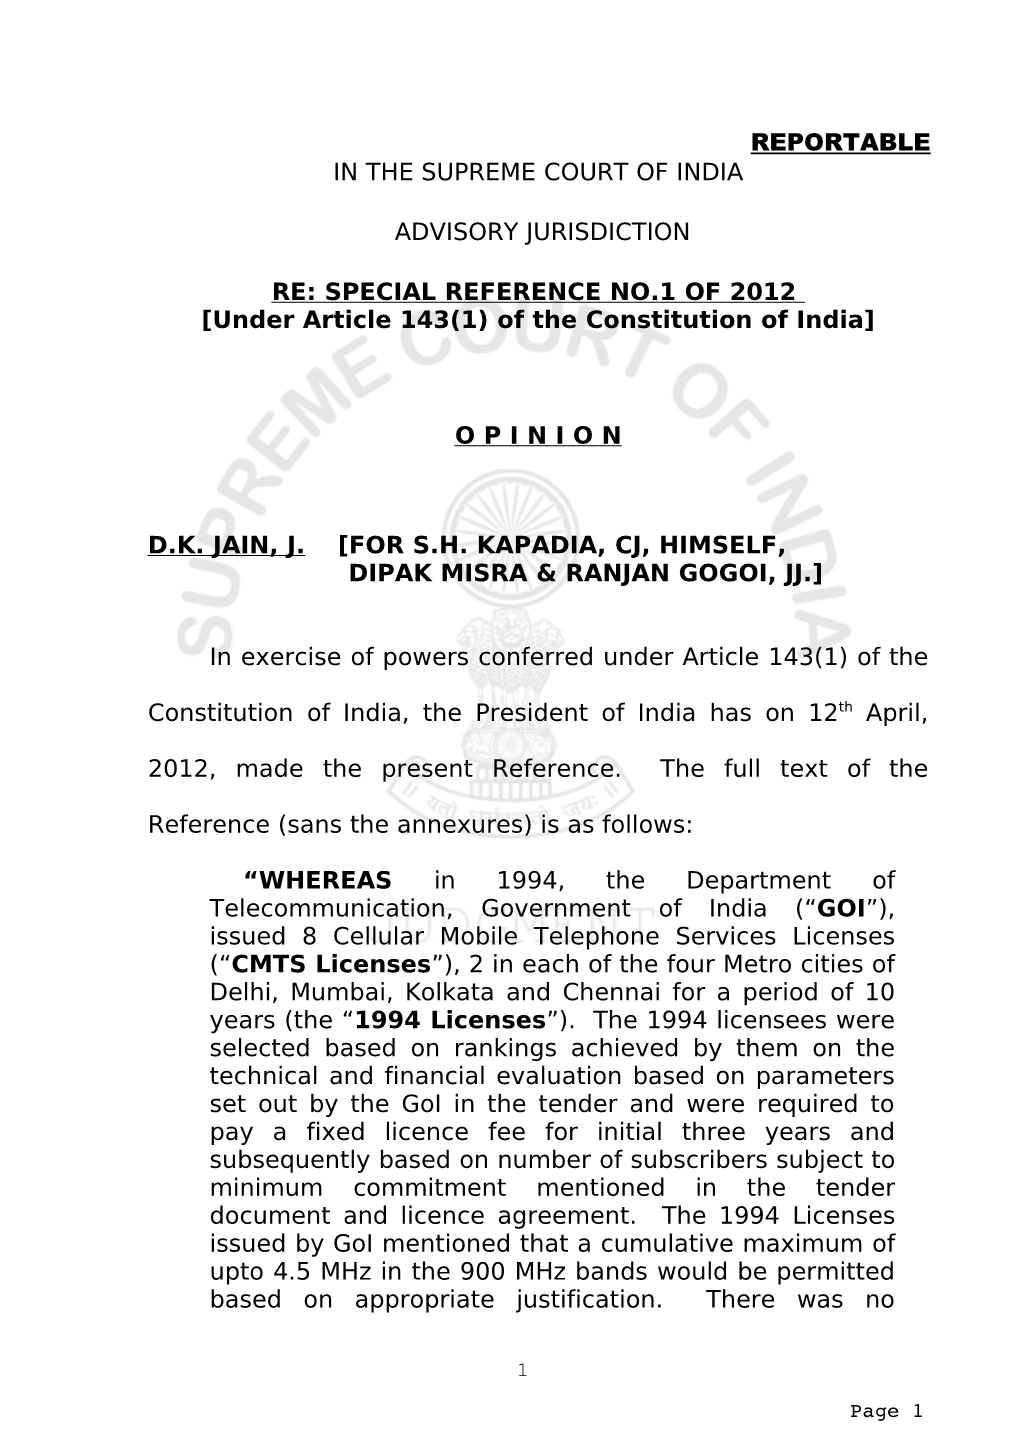 REPORTABLE in the SUPREME COURT of INDIA ADVISORY JURISDICTION RE: SPECIAL REFERENCE NO.1 of 2012 [Under Article 143(1) of T